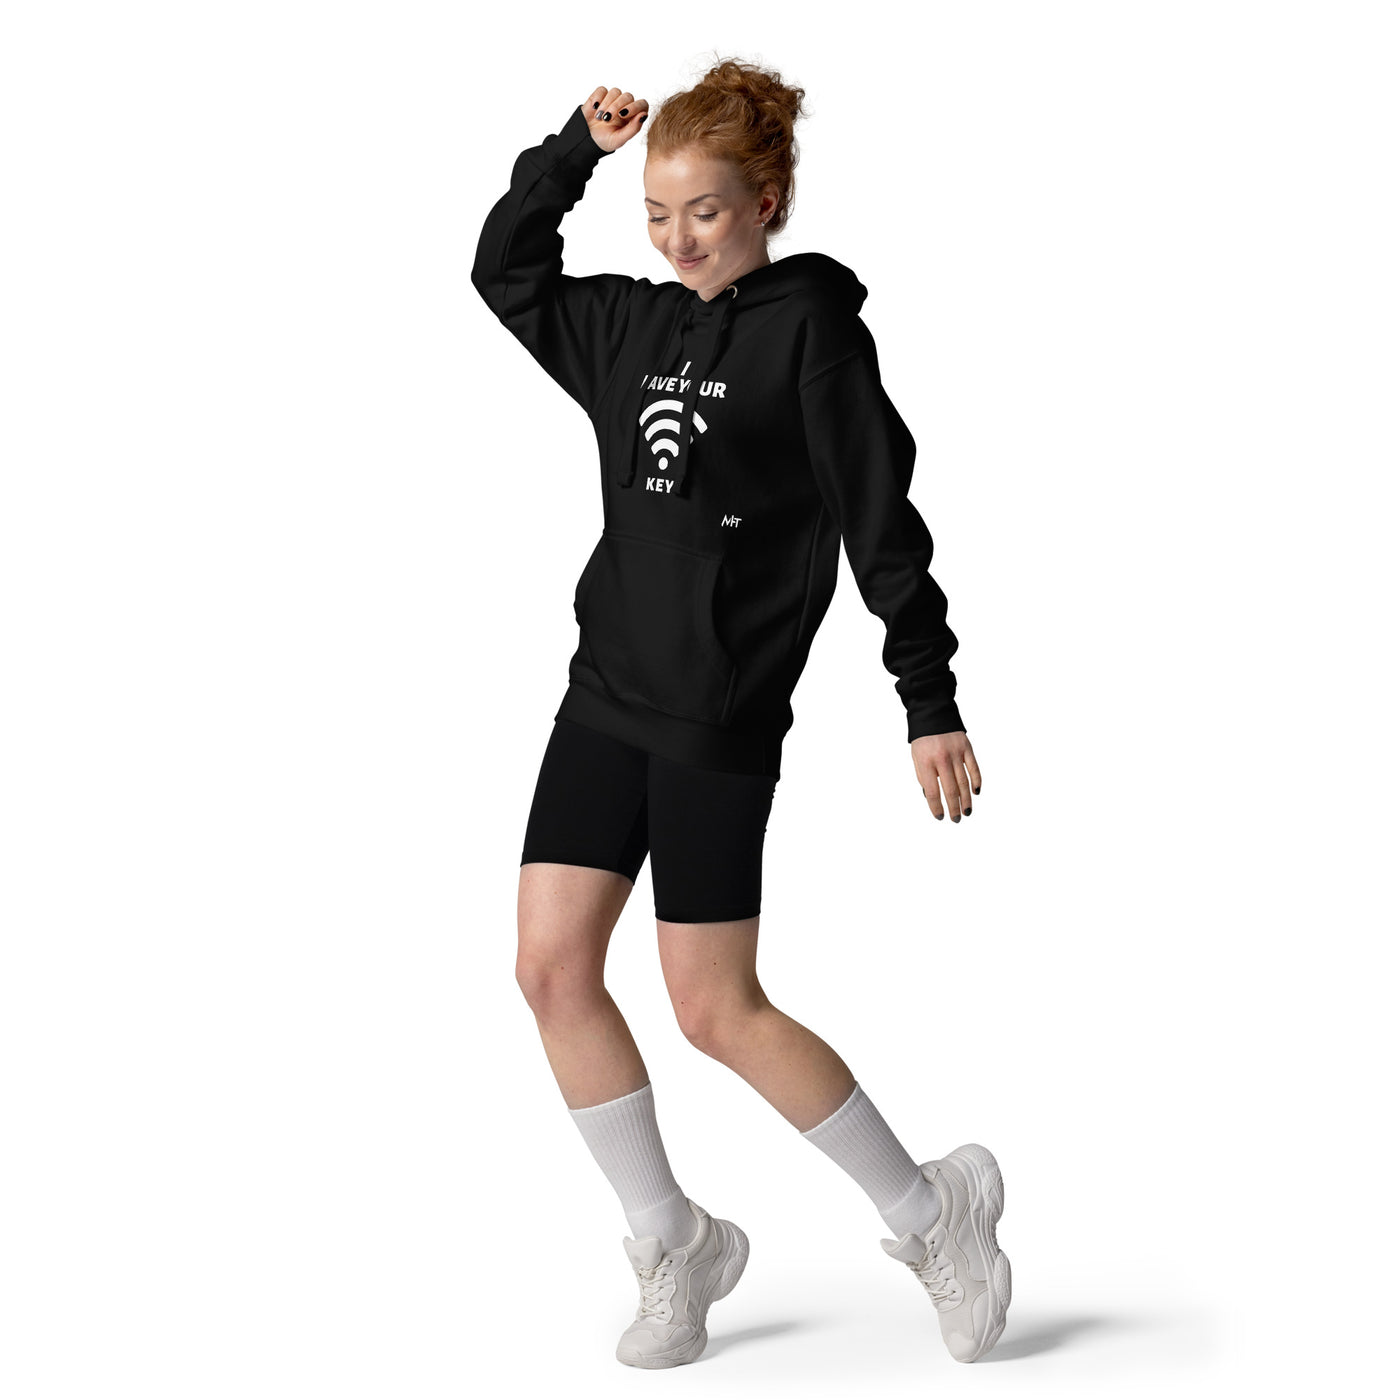 I have your Wi-Fi password - Unisex Hoodie